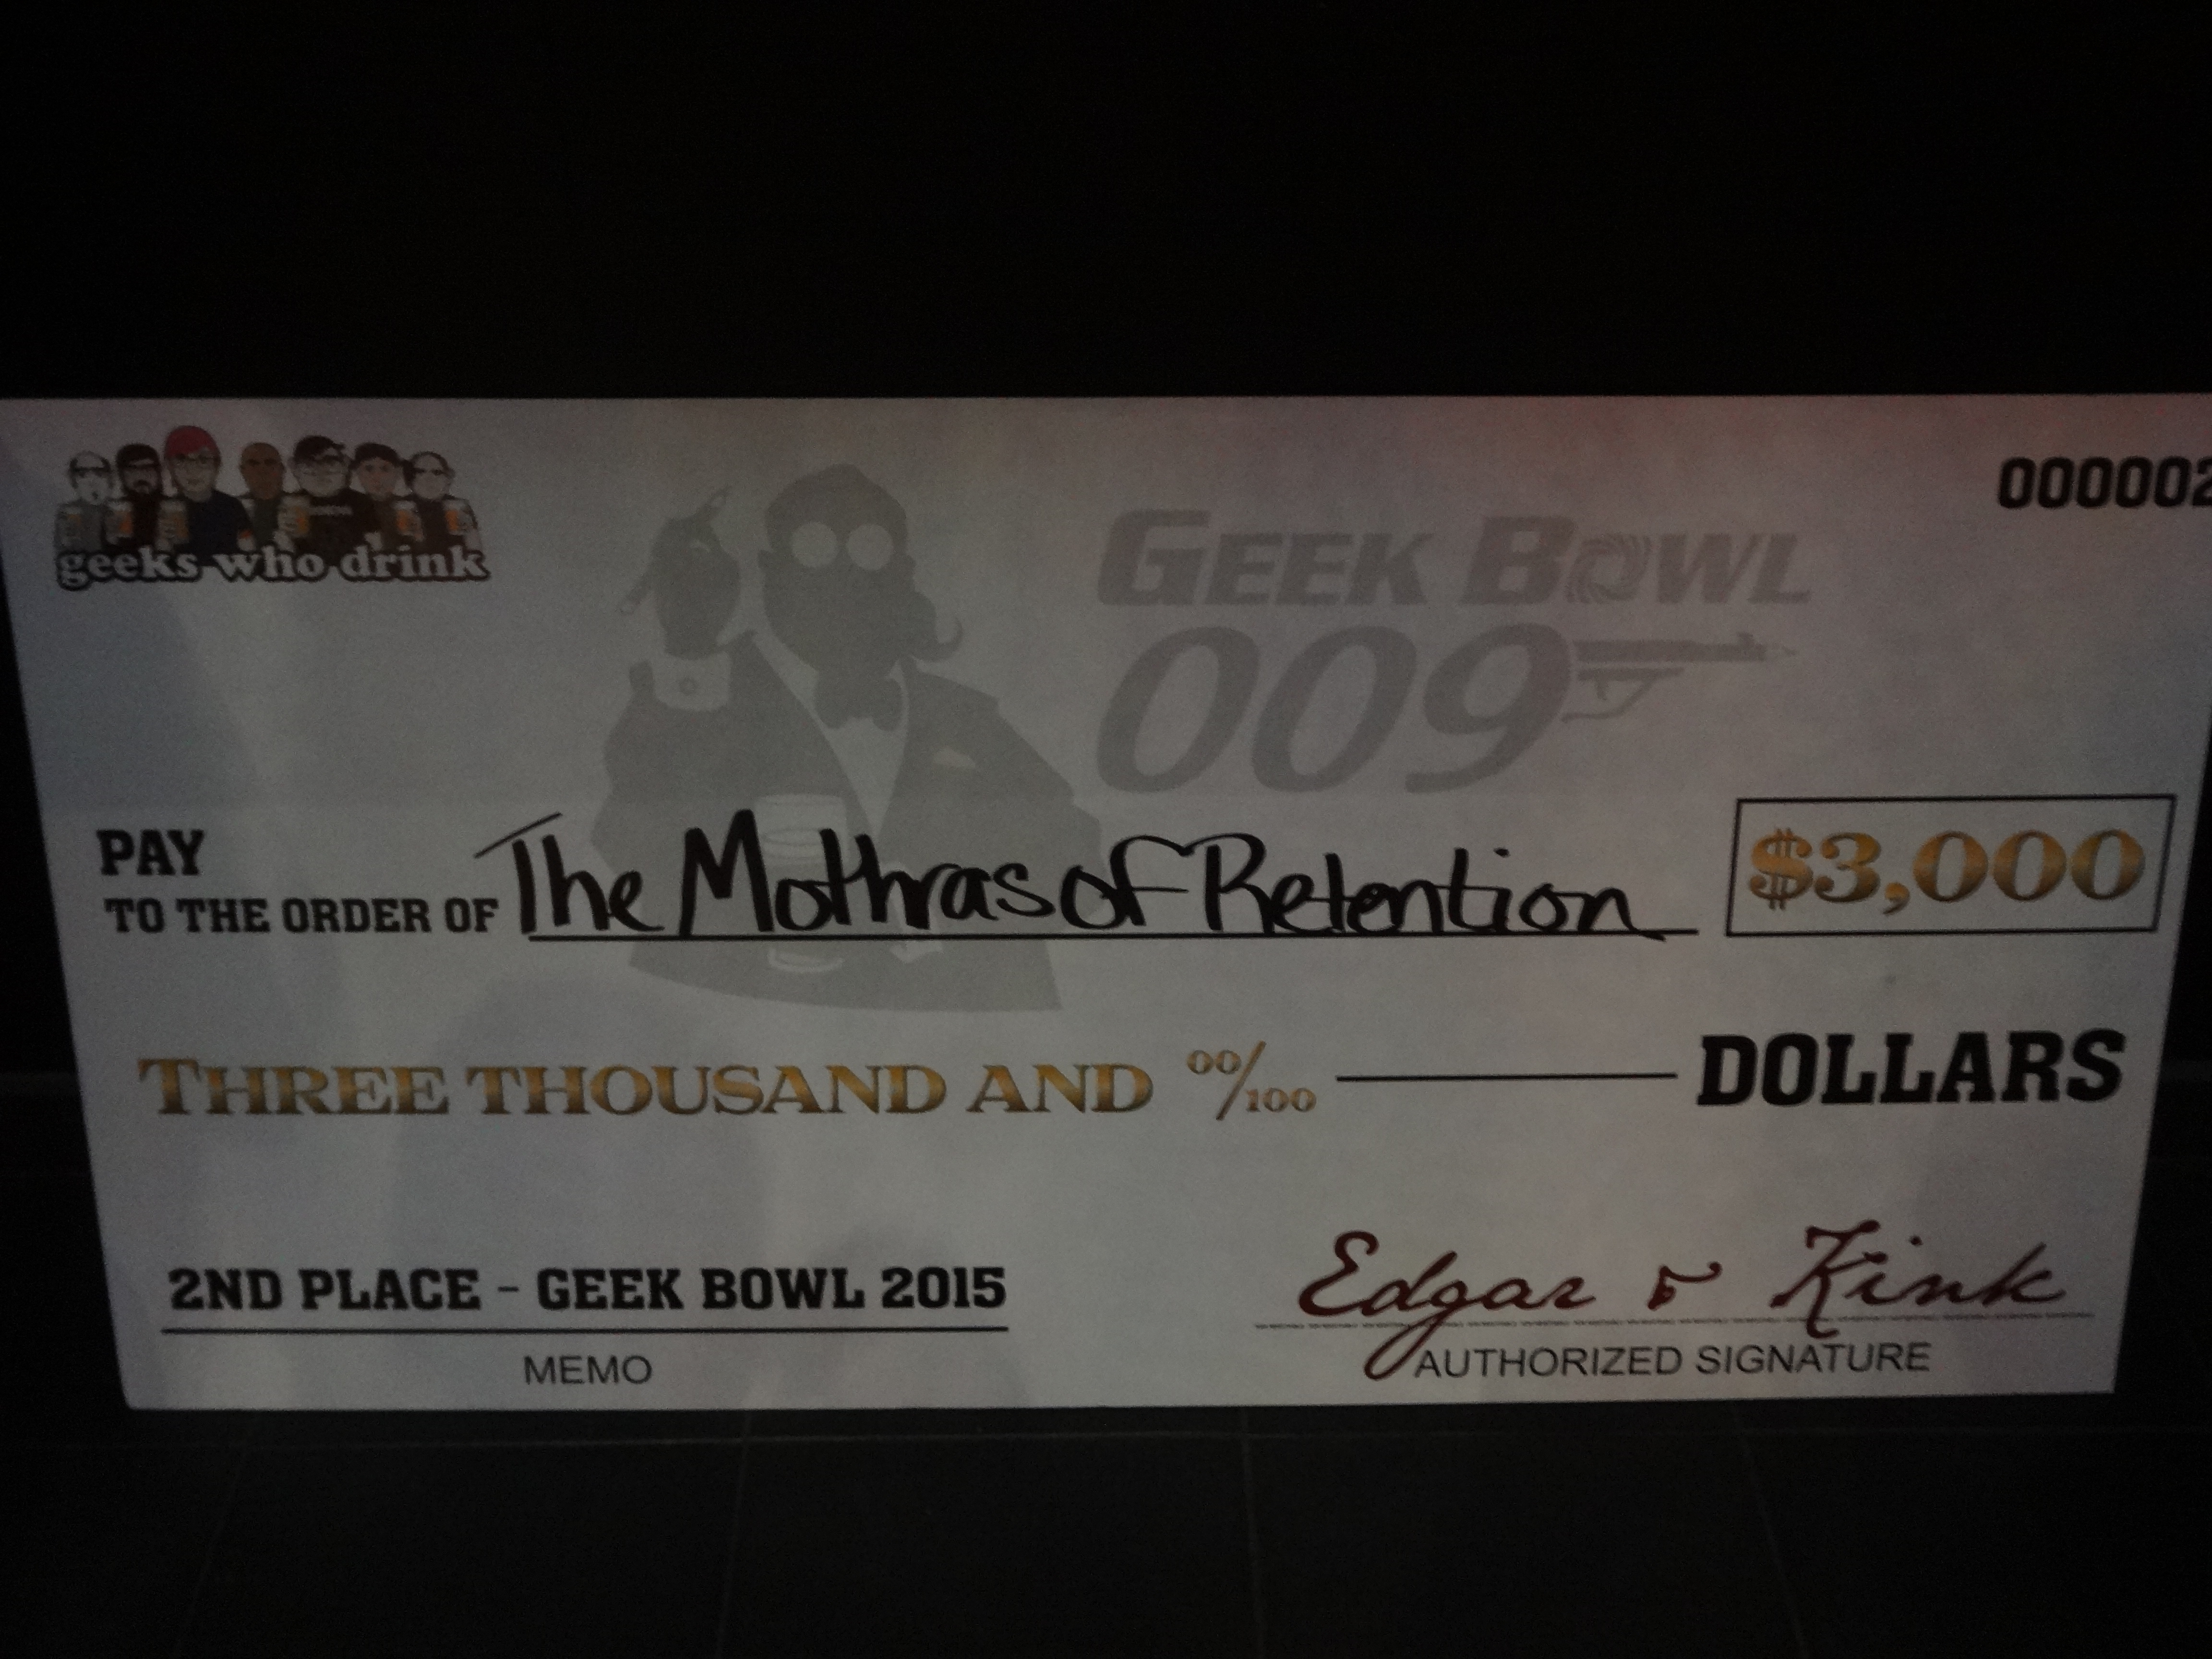 $3000 novelty check made out to Mothras of Retention